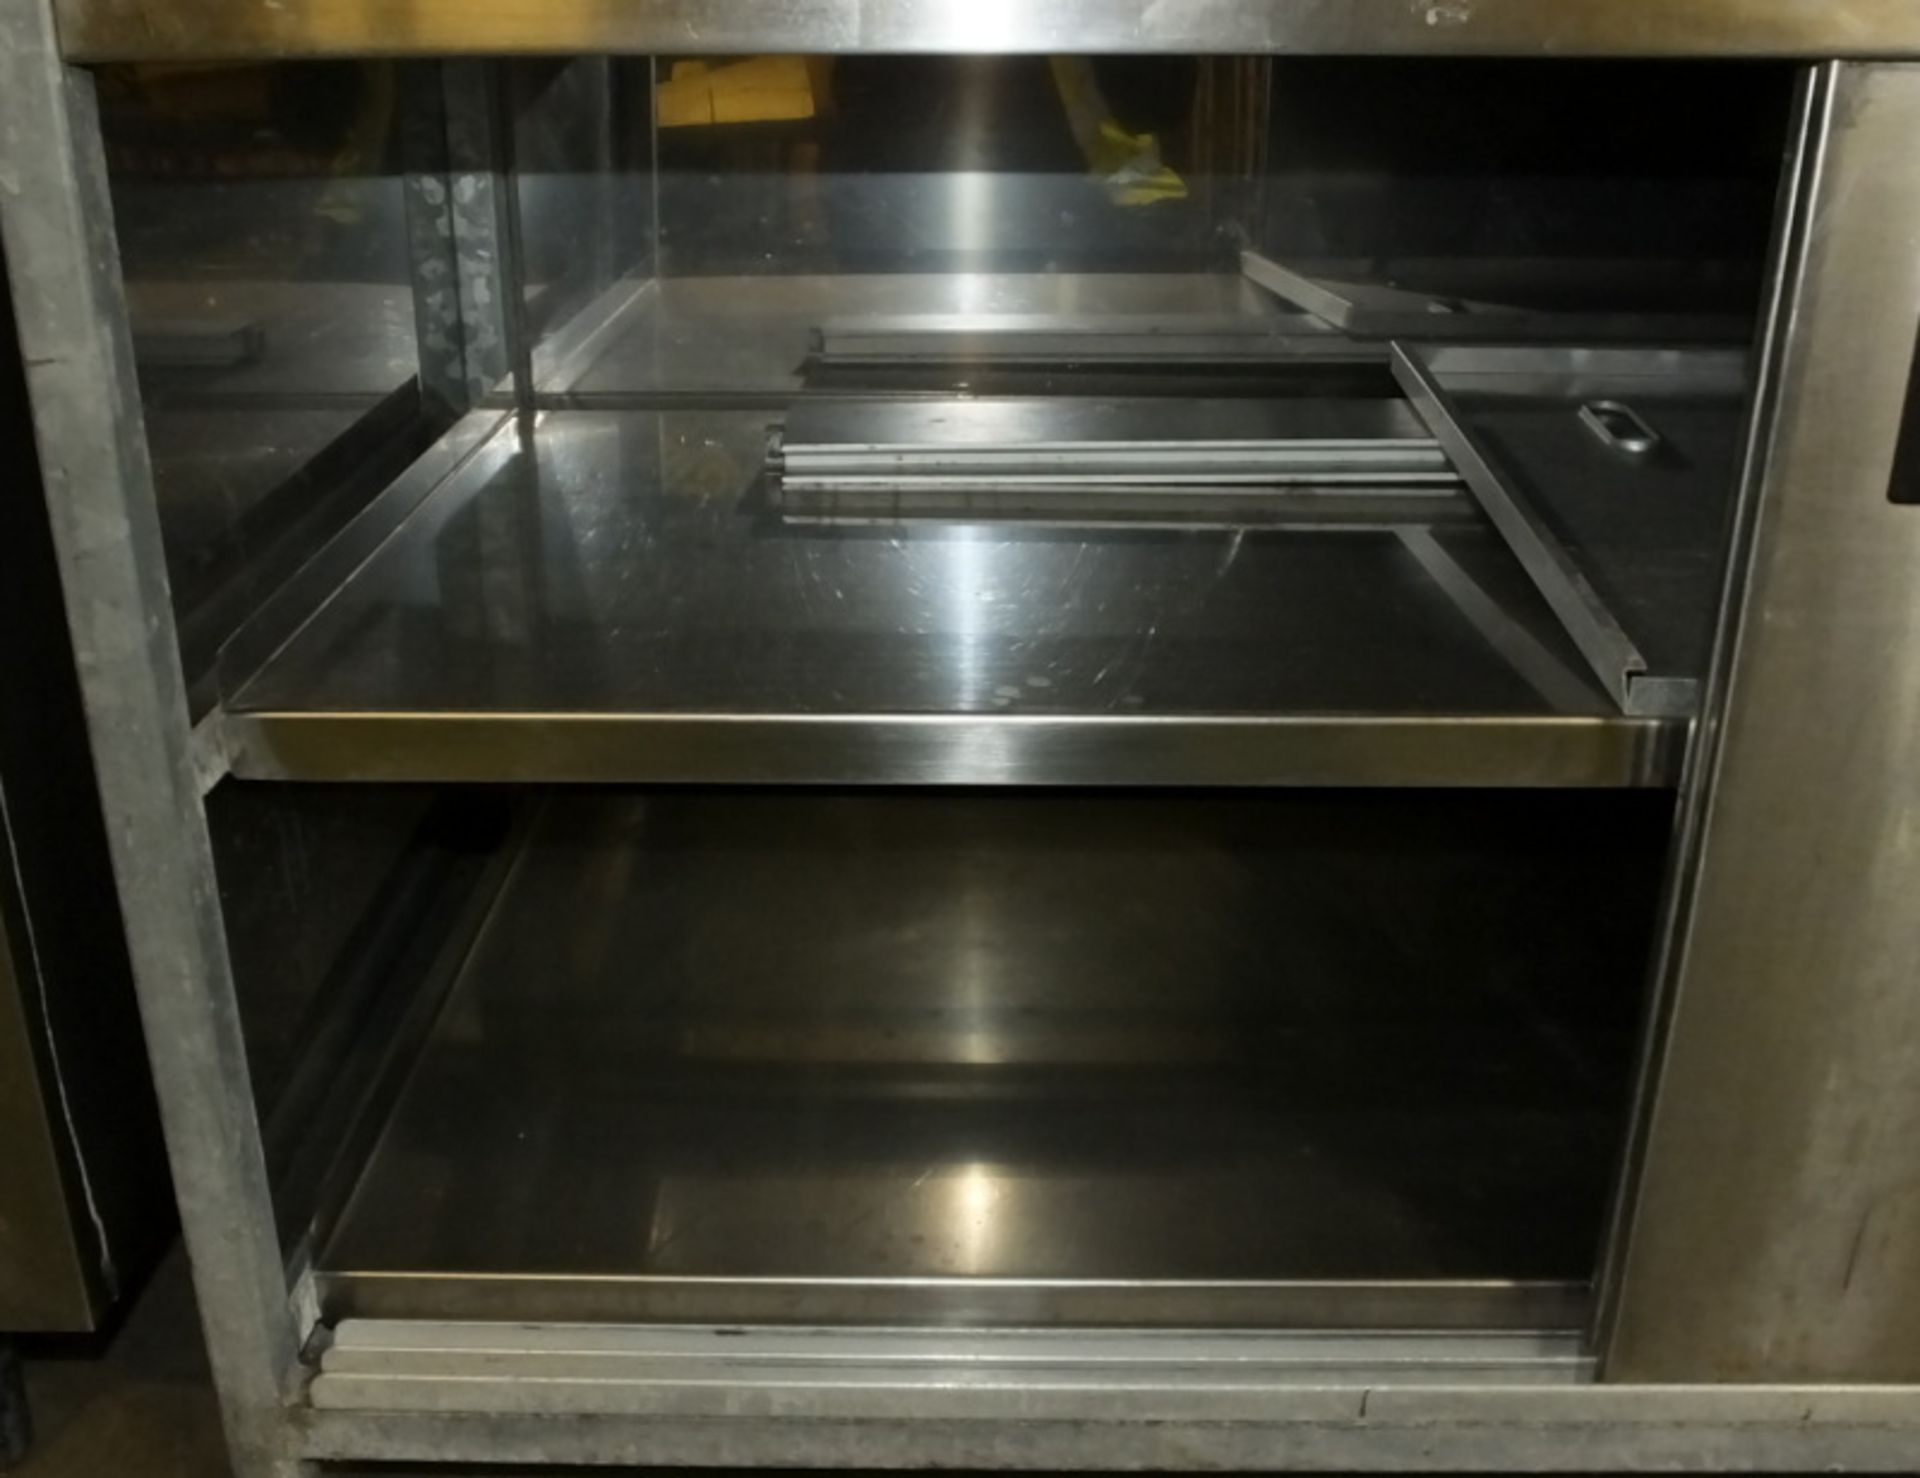 Stotts Of Oldham Stainless Steel Counter L 1530mm x W 760mm x H 900mm - Image 4 of 4